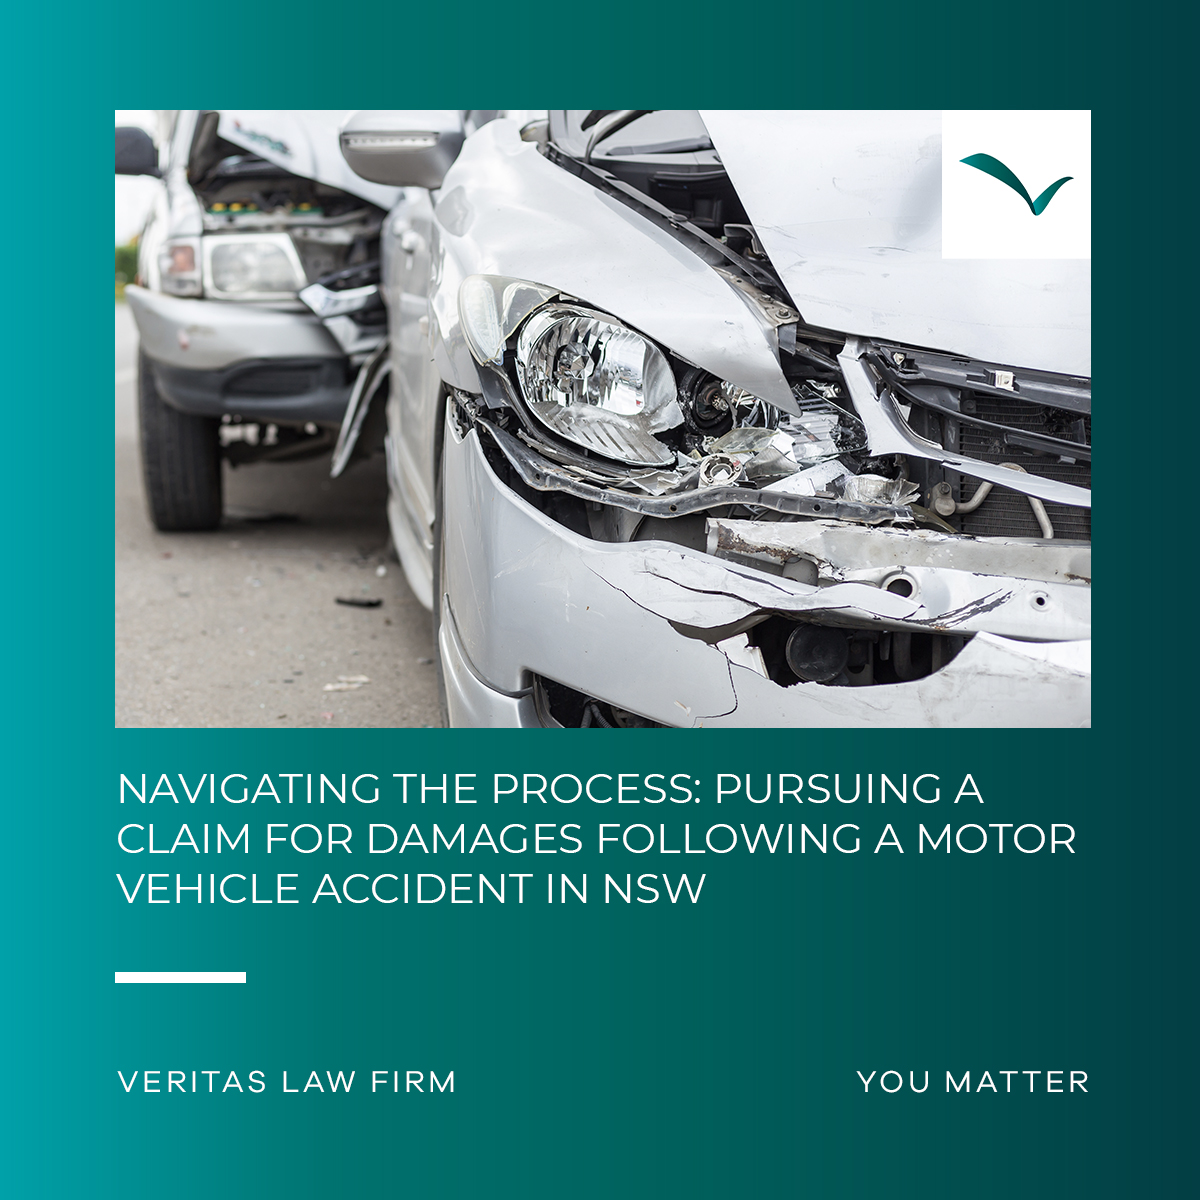 Dealing with a motor vehicle accident in NSW? Our latest article sheds light on the crucial steps to securing compensation for your damages. Don't miss out on what Veritas Law Firm has to offer! #MotorVehicleAccident #NSWLaw #LegalInsights 

🔗 l8r.it/YqdQ